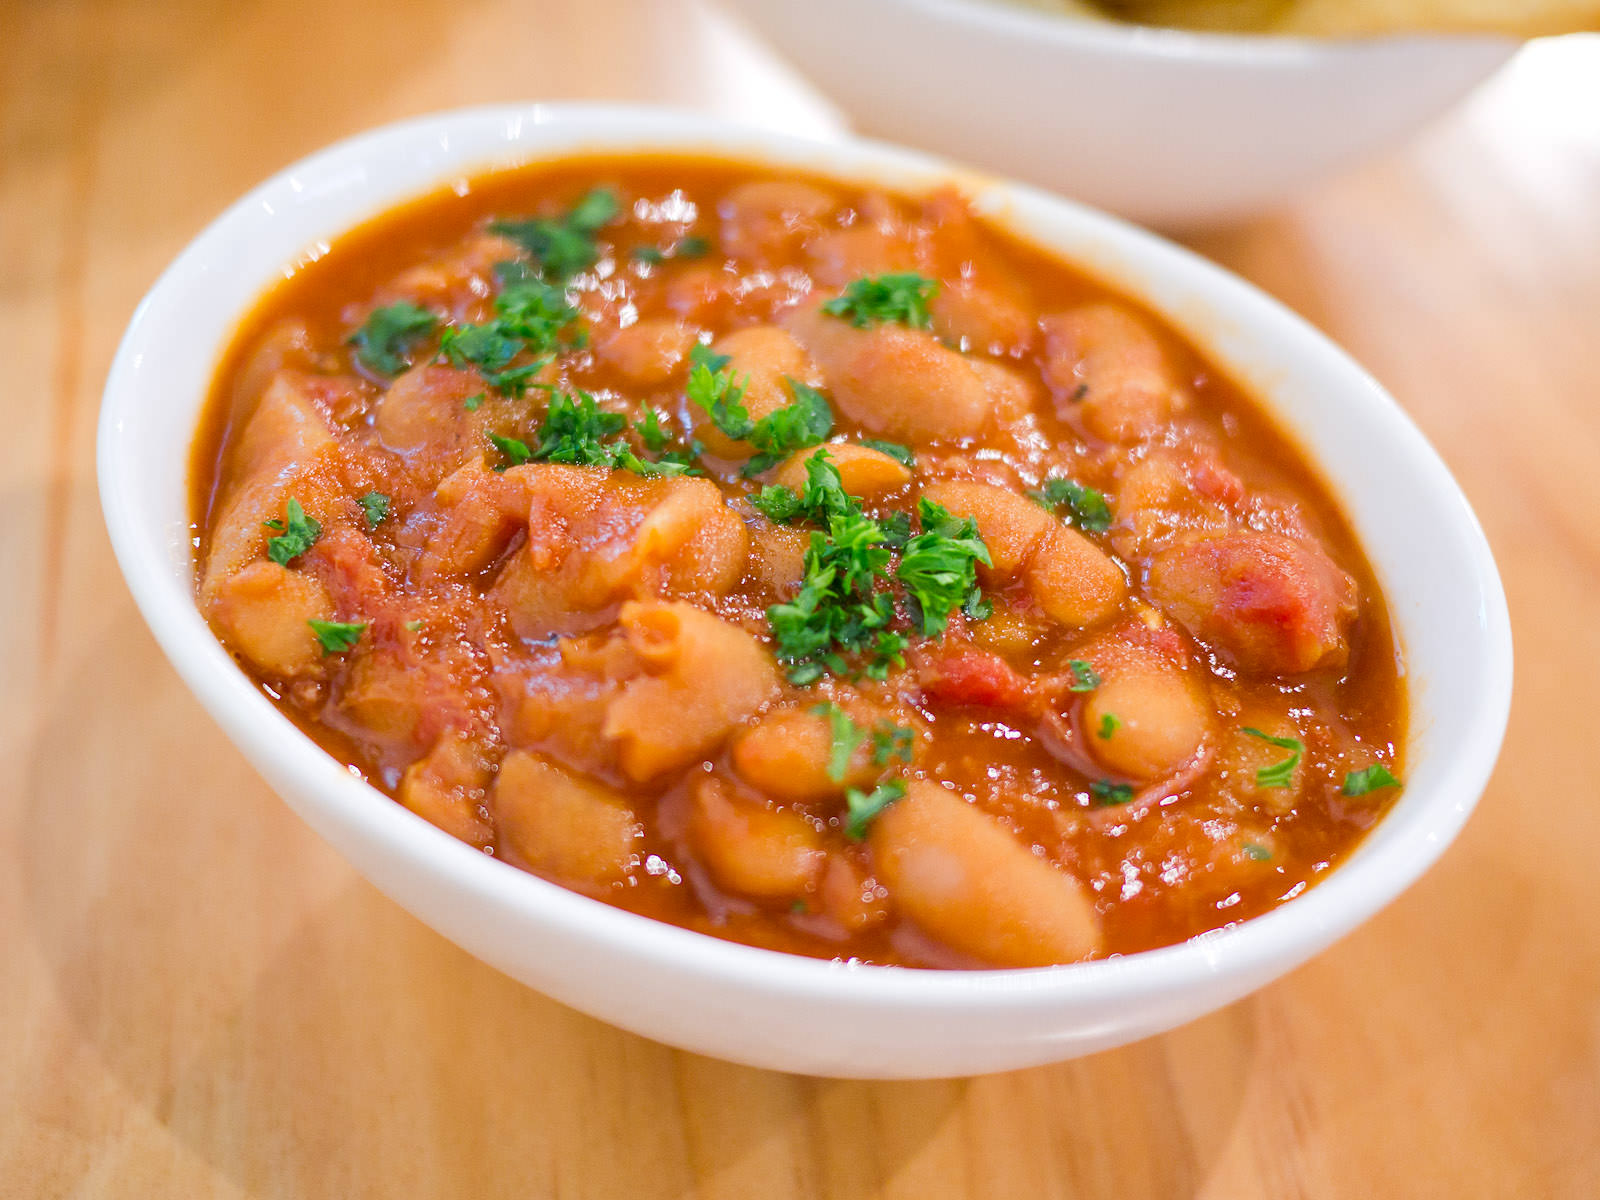 Baked beans with smoked ham hock (AU$5)